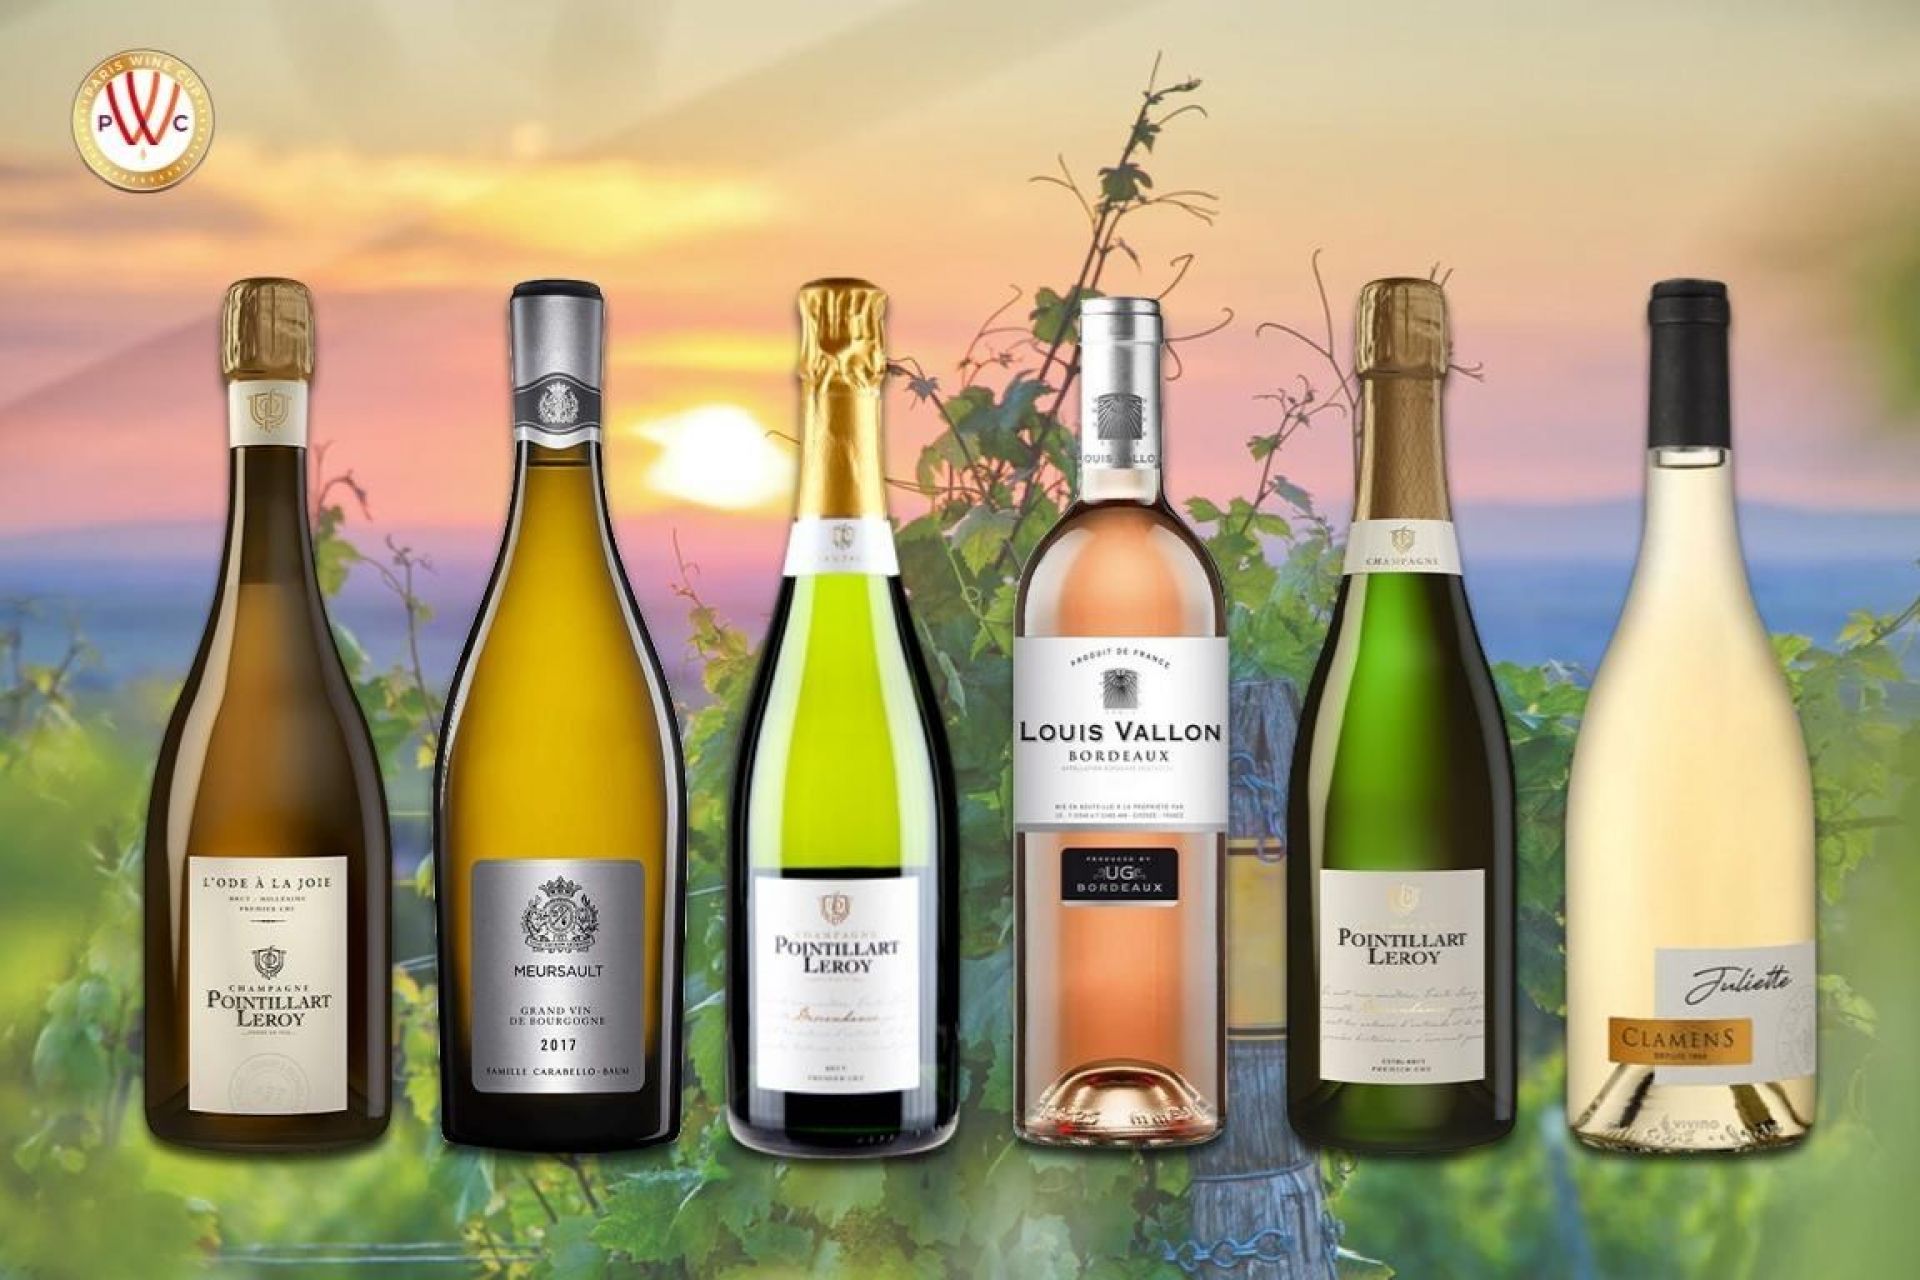 Bringing You Award-Winning French Wines To Tempt Your Taste Buds